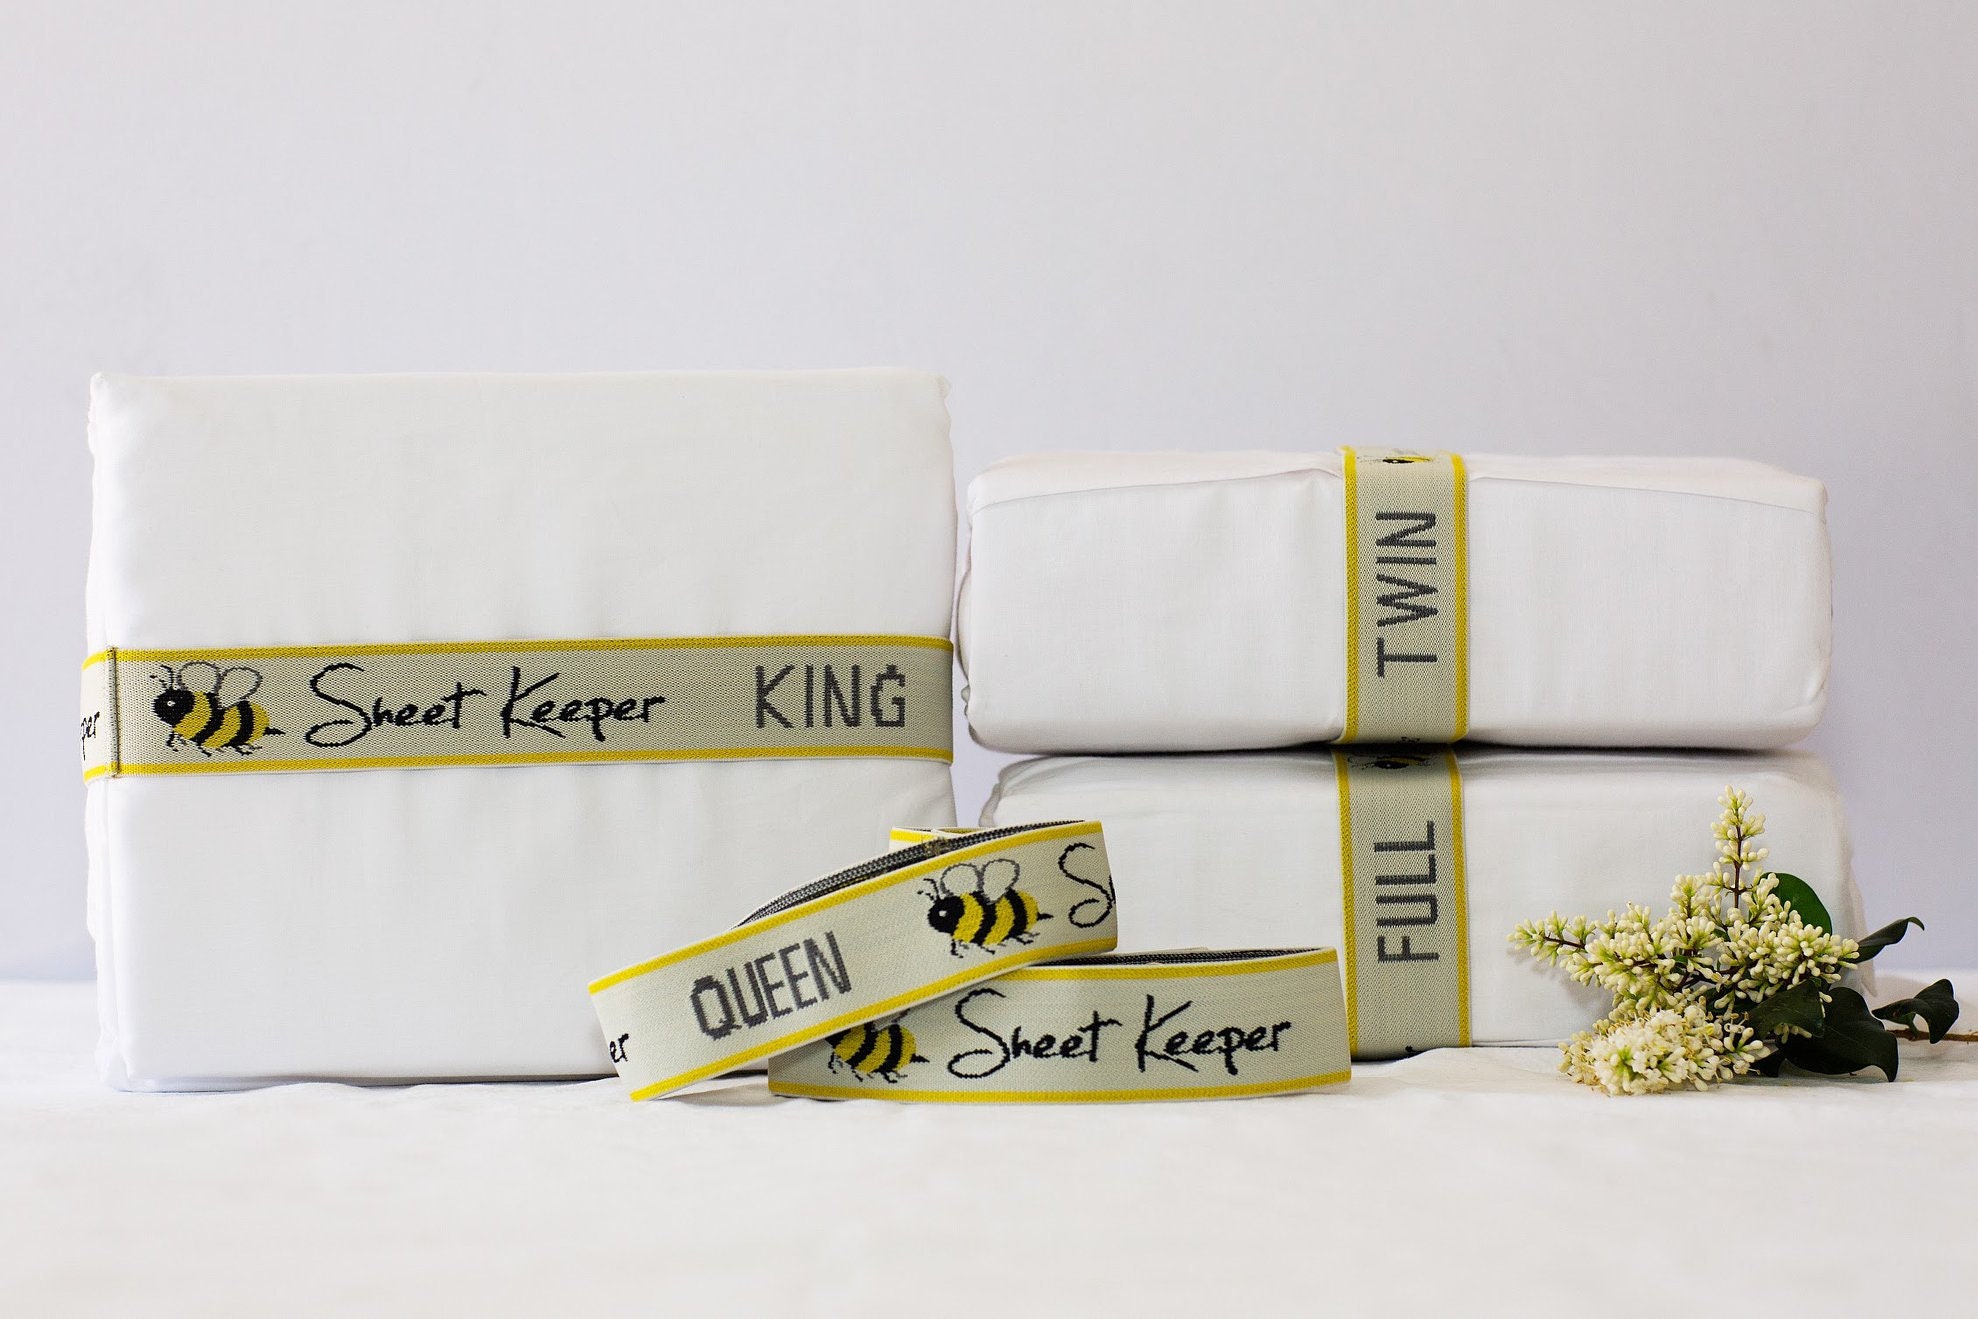 Fresh Ideas Bed Sheet Straps - Easy to Use Sheet Holders Adjustable to Fit All Size Beds, 4 Pack